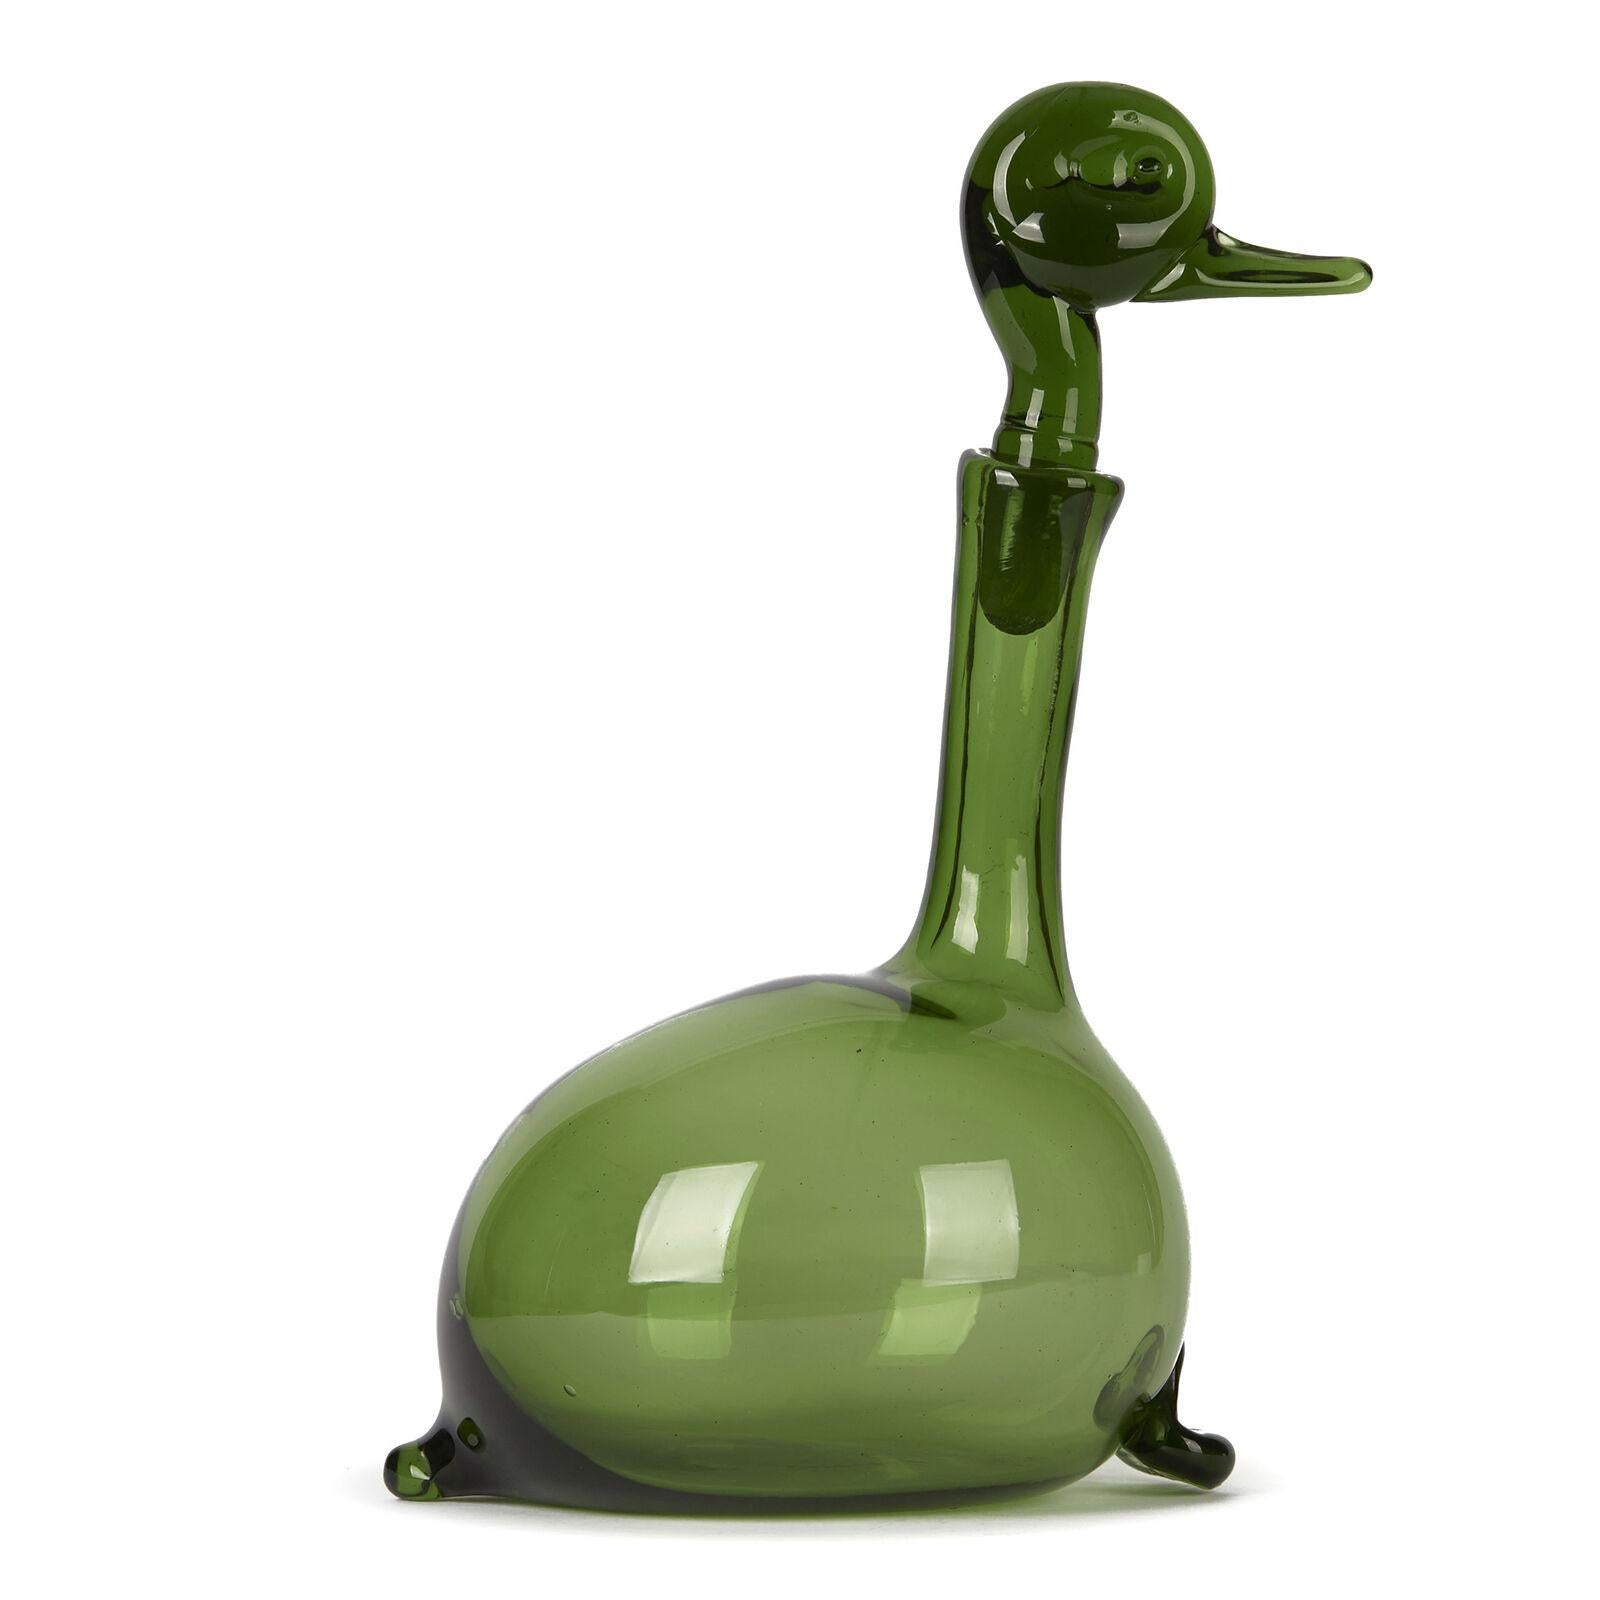 A mid twentieth century green Murano glass wine decanter in the form of a duck, the base with feet to the front and tail to the rear, and the stopper in the form of the duck’s head. Made with Murano Empoli Verde glass. Designed by Gio Ponti.

